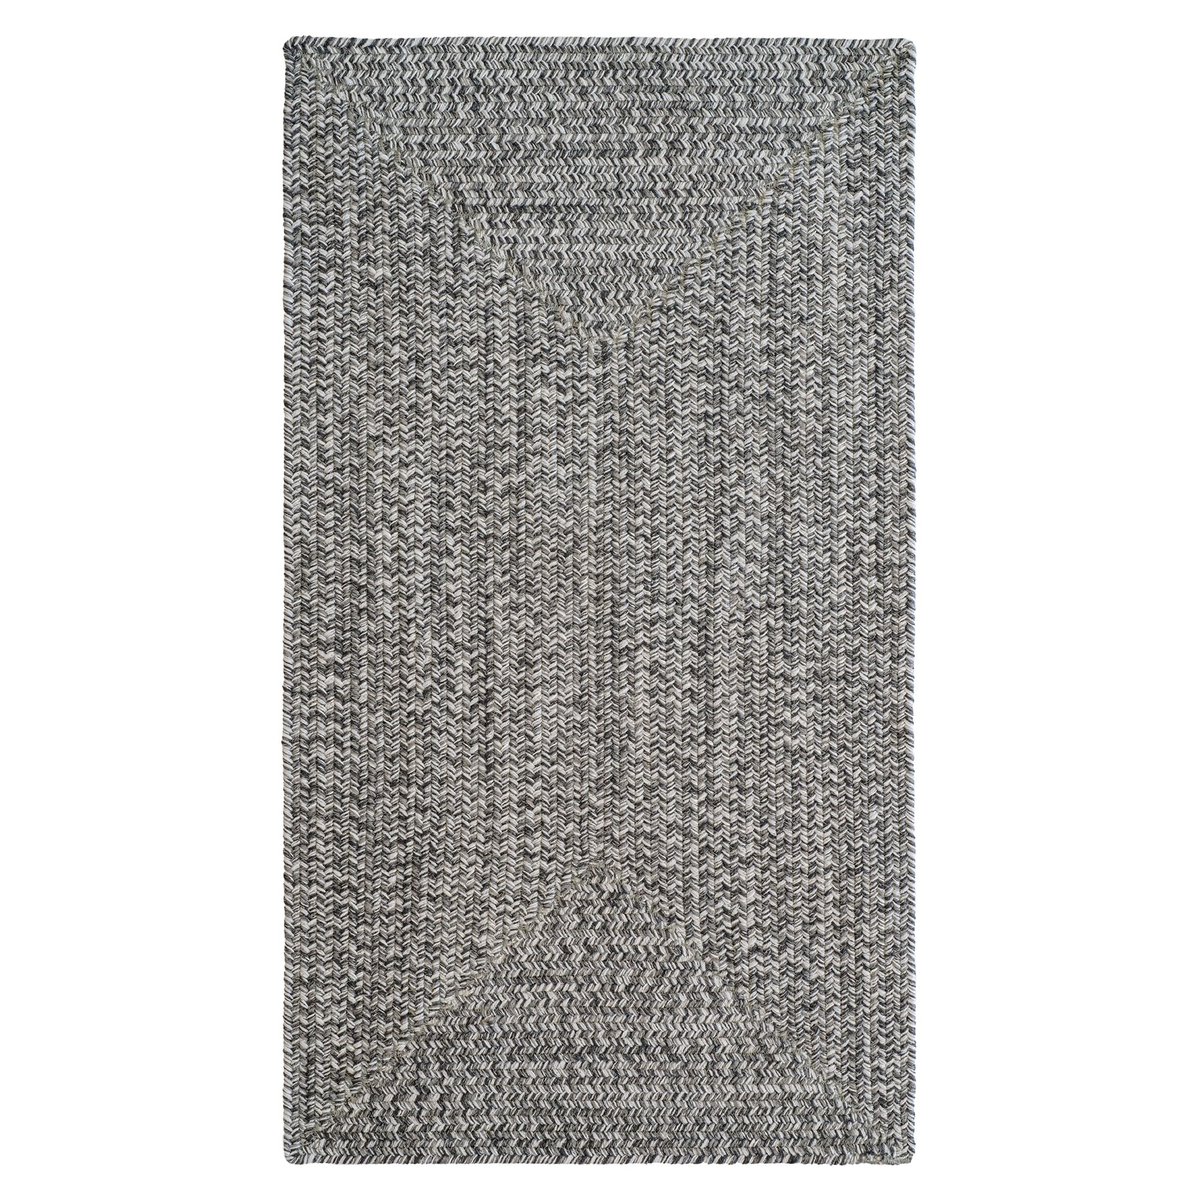 Capel Worcester Braided Country Area Rugs